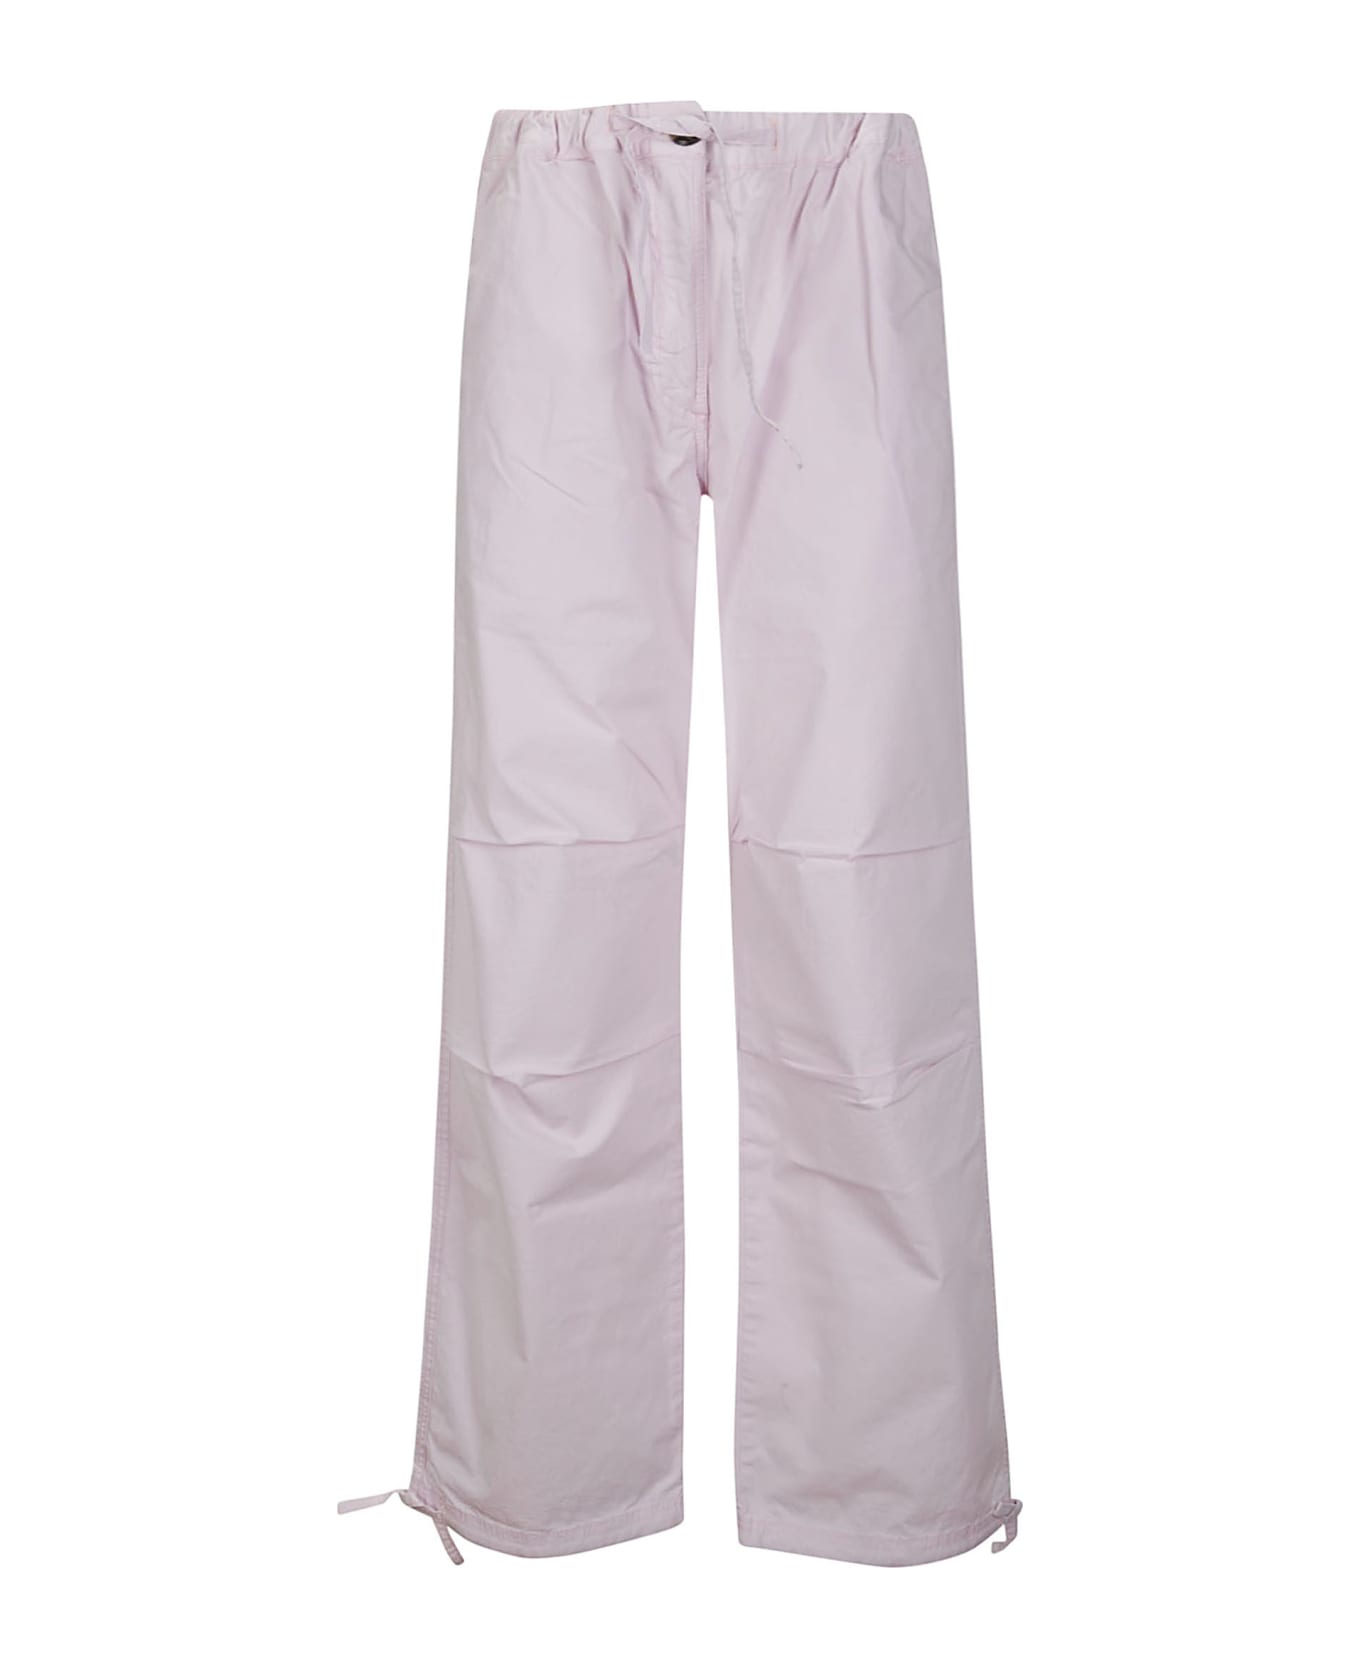 Ganni Washed Cotton Canvas Draw String Pants - LIGHT LILAC